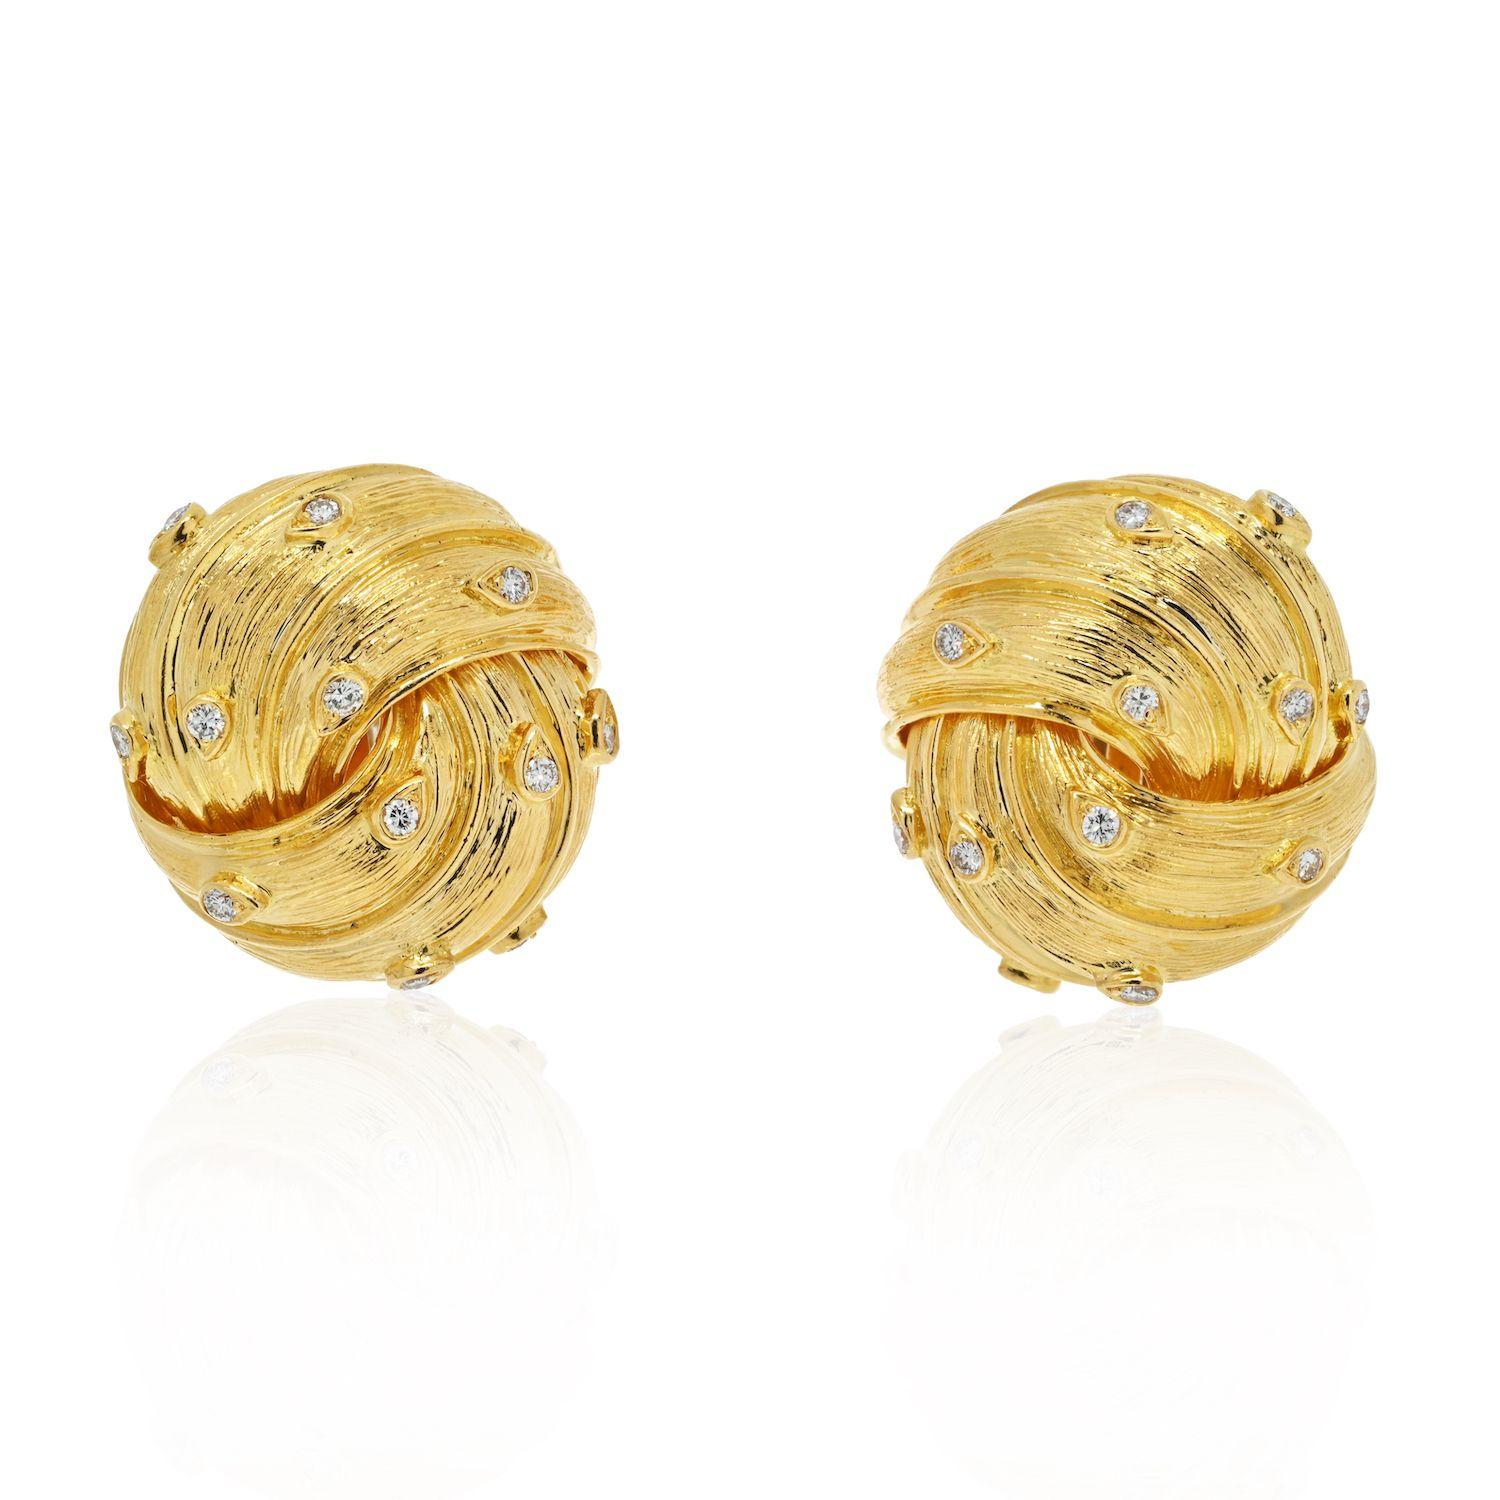 Classic gold earrings are timeless piece of jewelry that never goes out of style. When shopping for gold pair of earrings try this fabulous 18K Yellow Gold pair by David Webb. They are incredibly versatile and can be worn with a variety of outfits,